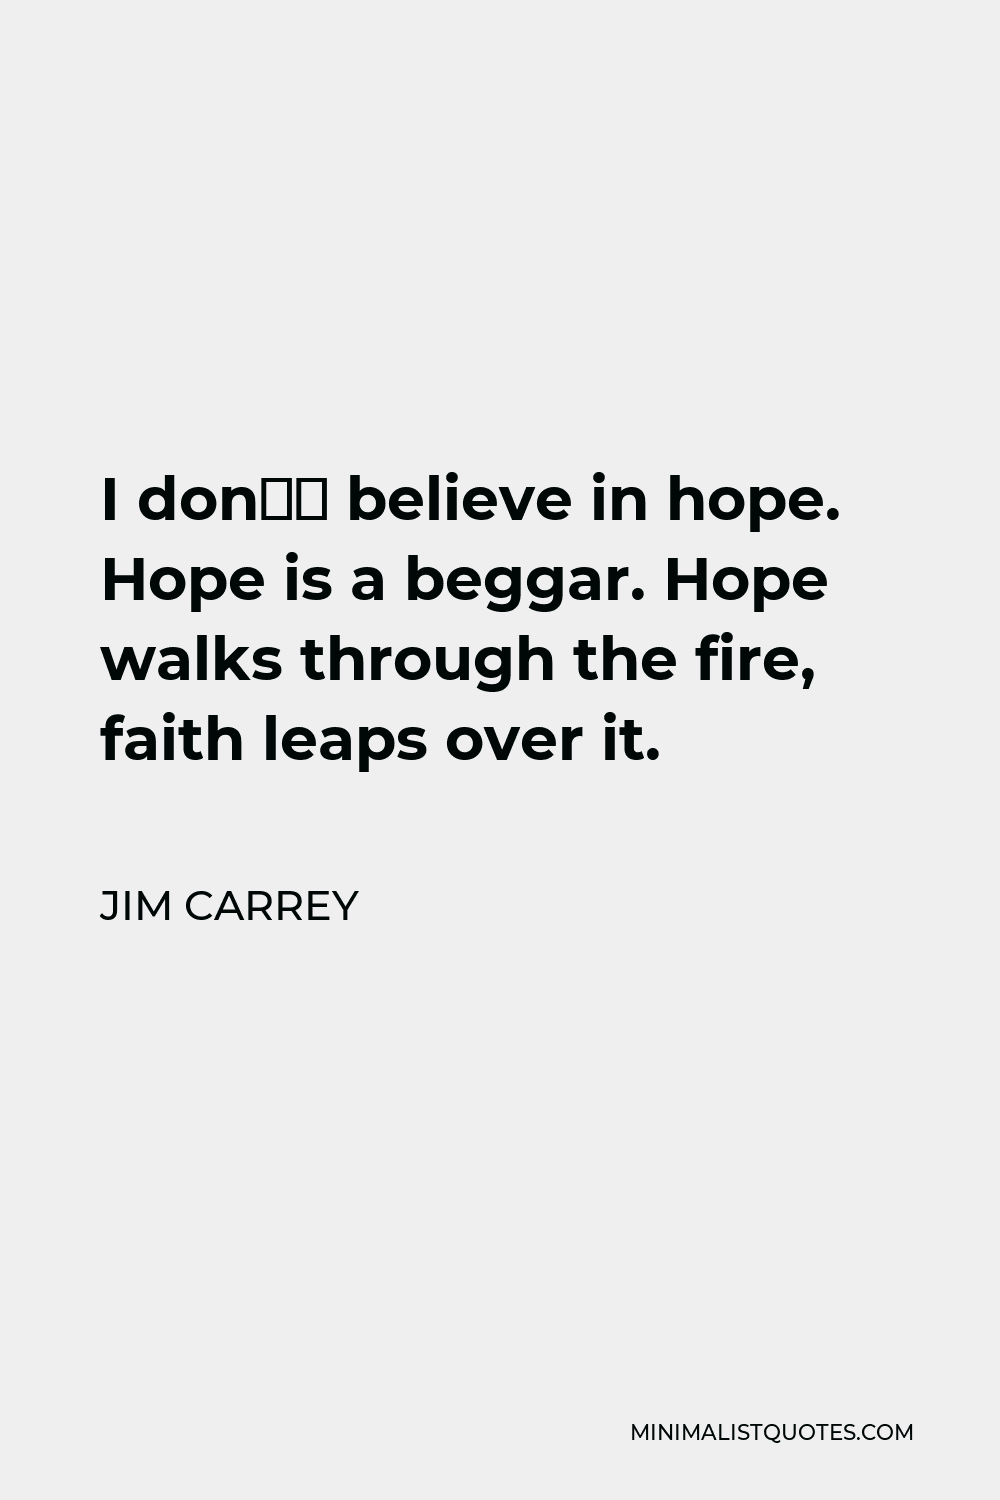 Jim Carrey Quote - I don’t believe in hope. Hope is a beggar. Hope walks through the fire, faith leaps over it.